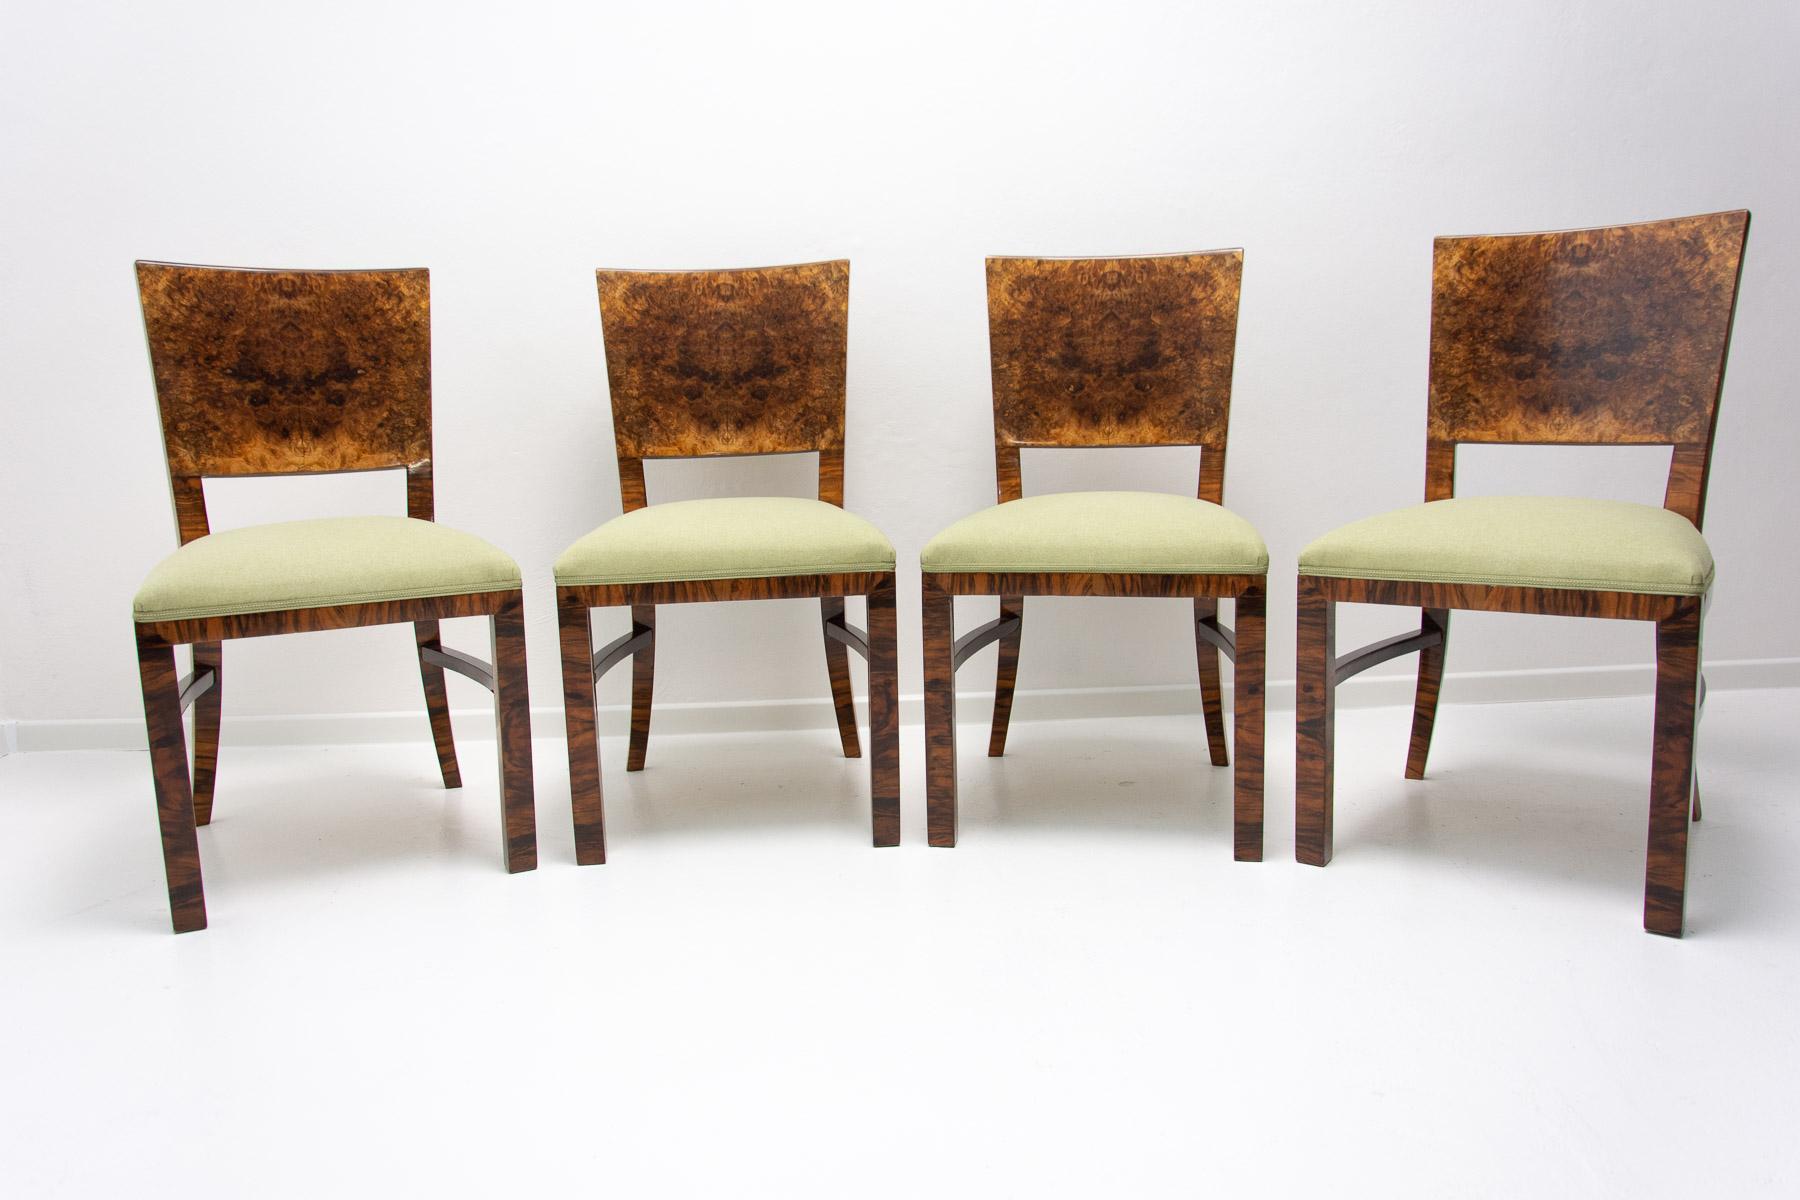 These dining chairs were made in the ART DECO style in the former Czechoslovakia in the 1930´s.

Made of walnut. Fully renovated, varnished to a high gloss with polyurethane, new upholstery.

In excellent condition.

Price is for the set of 4.

